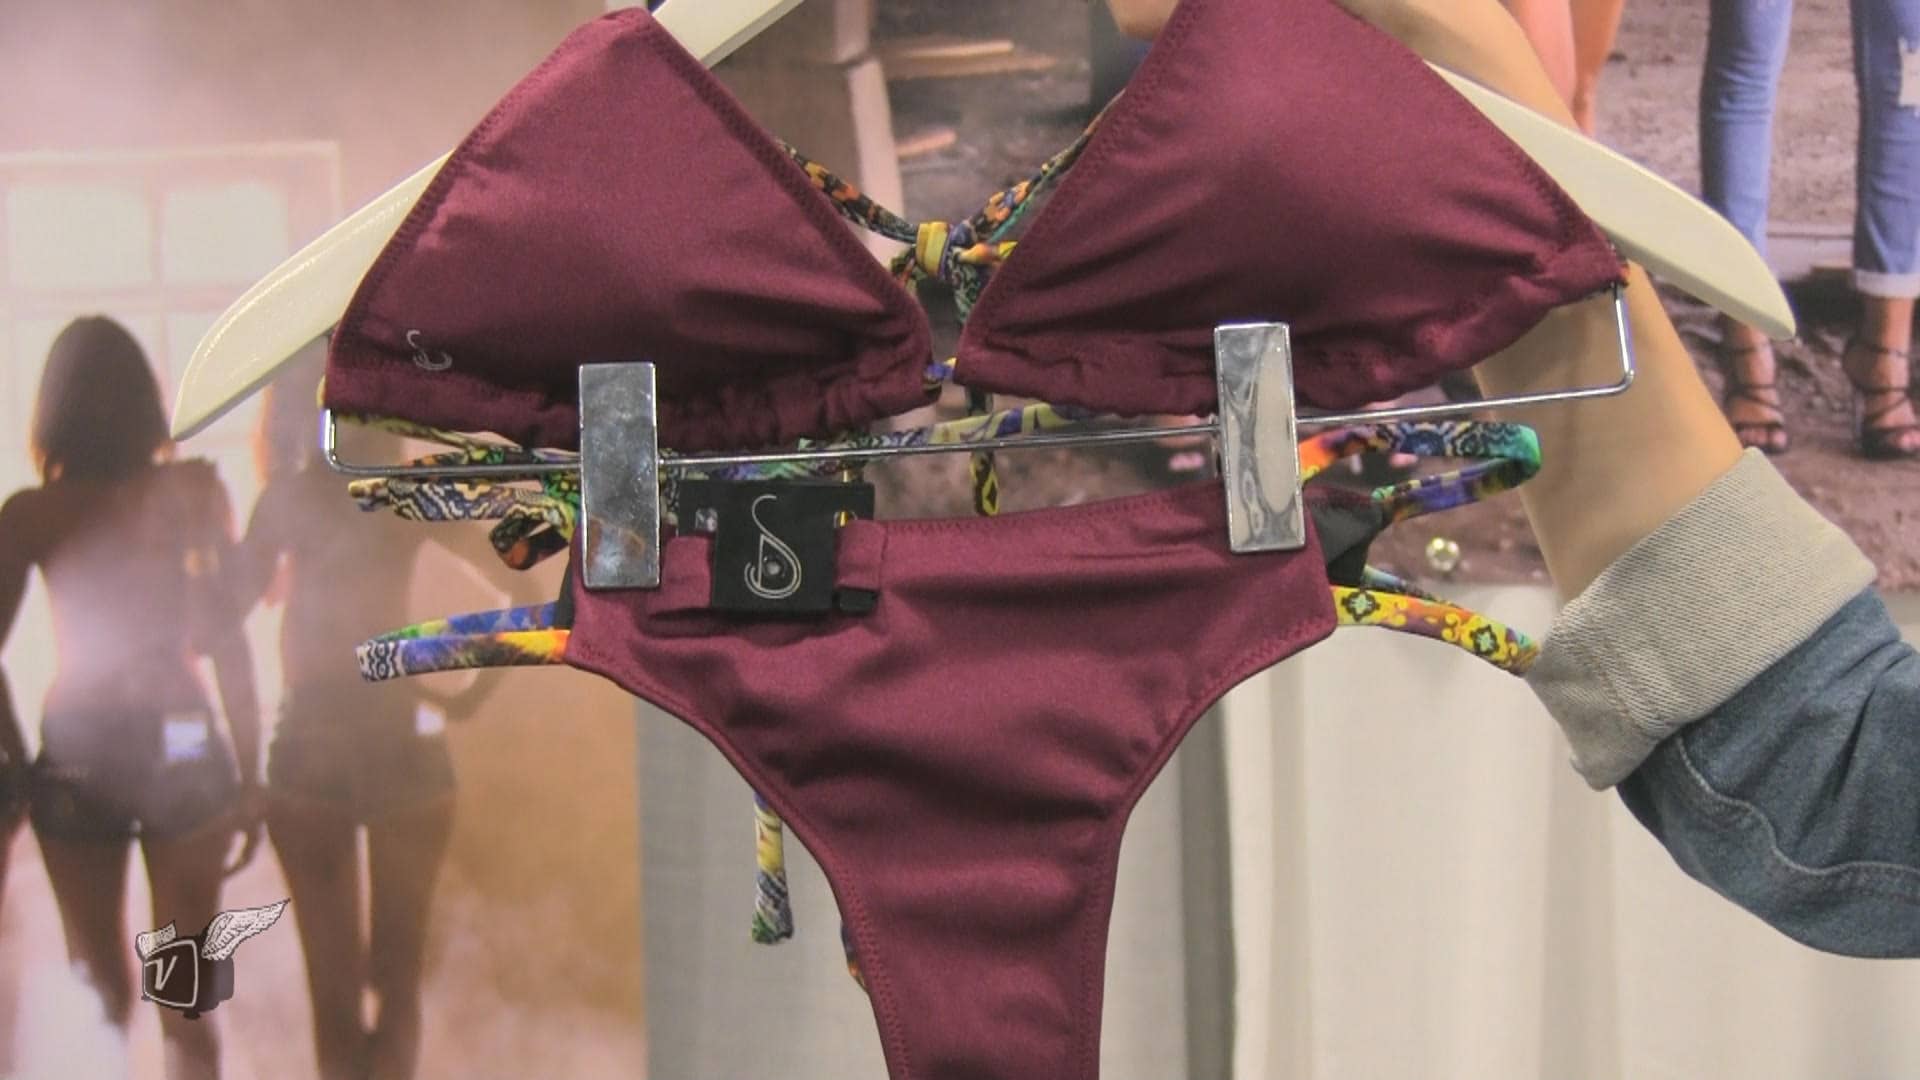 A Spinali Design bikini that connects to an app.